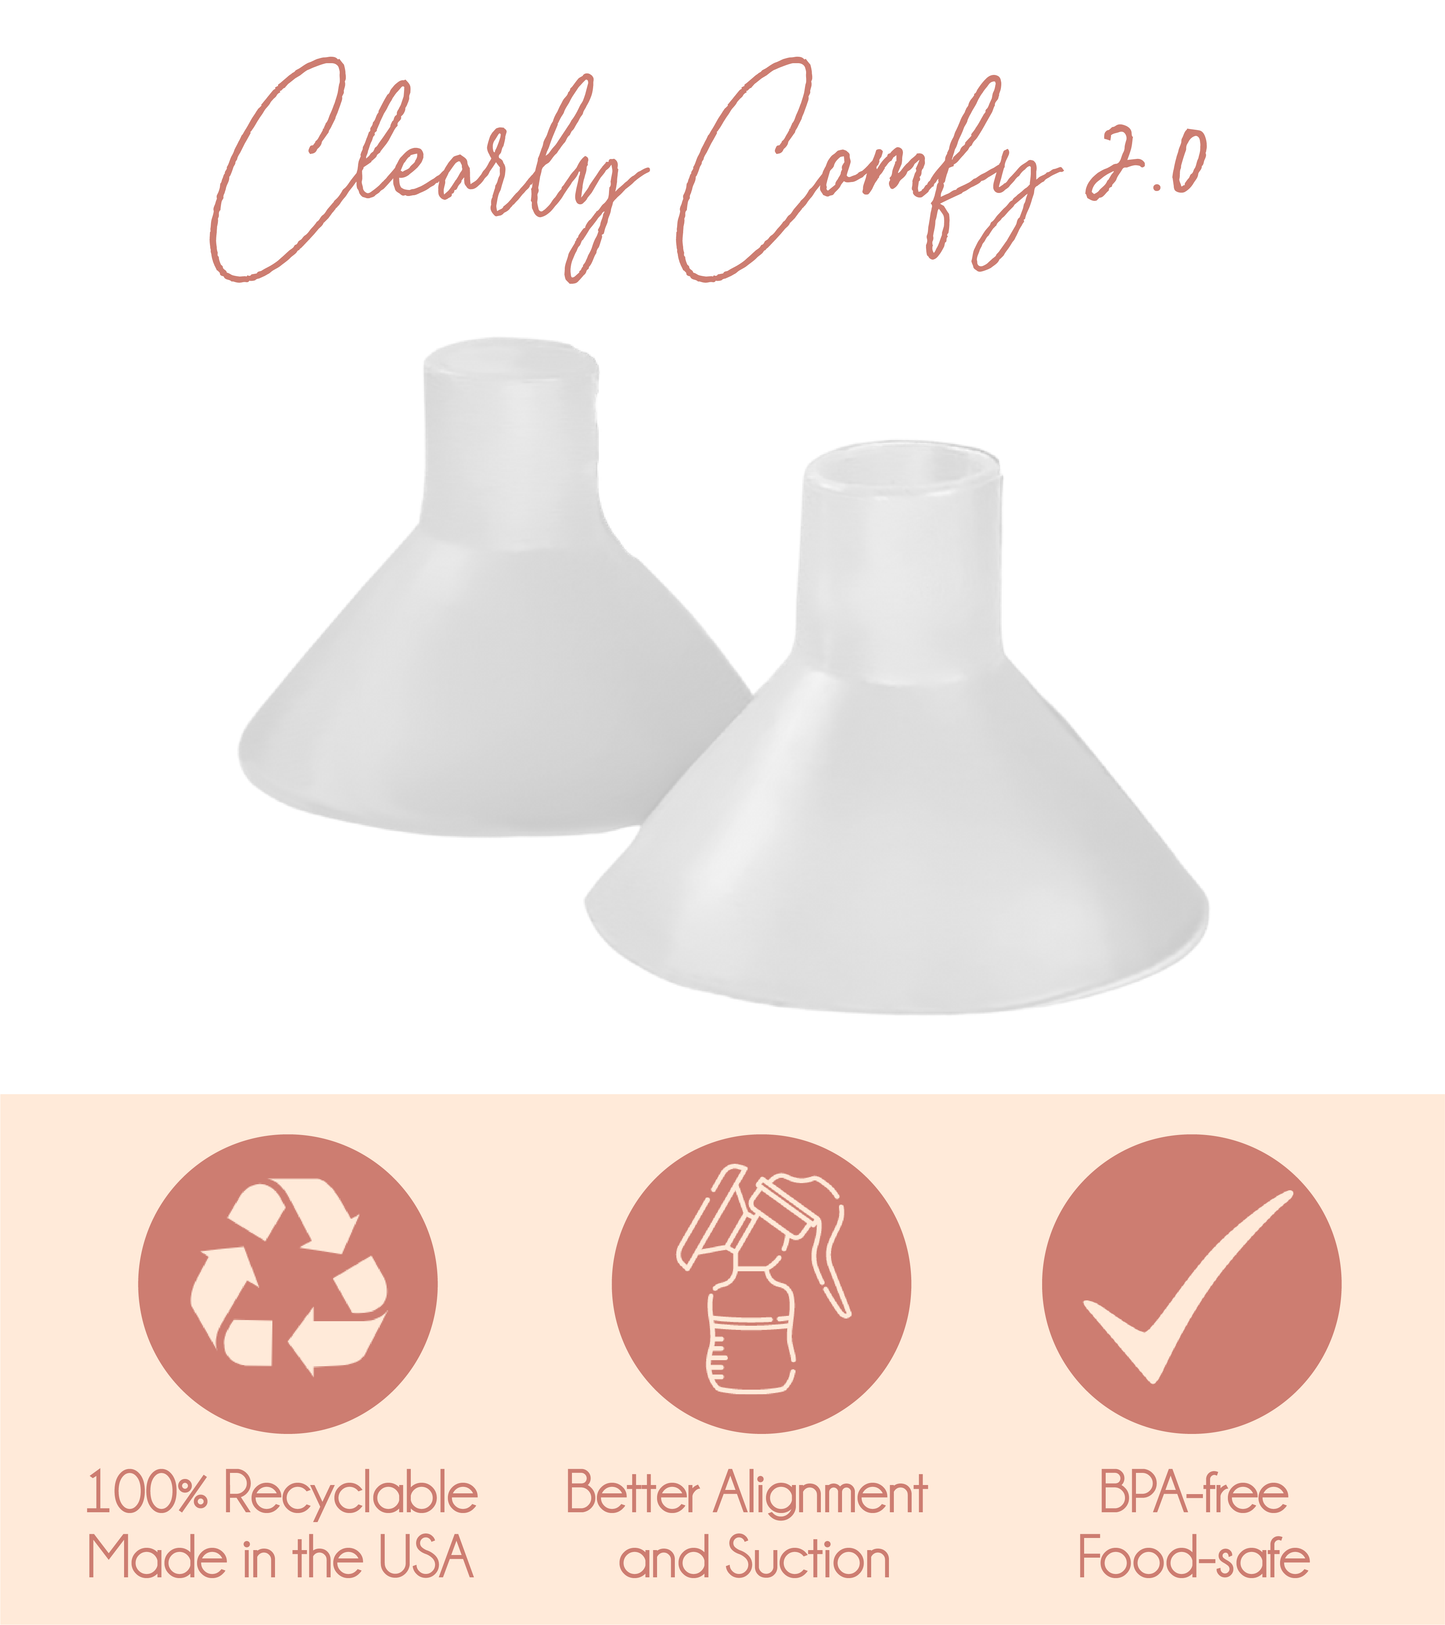 BeauGen Breast Pump Cushions are recyclable, provide better alignment and increased suction, and are food safe.